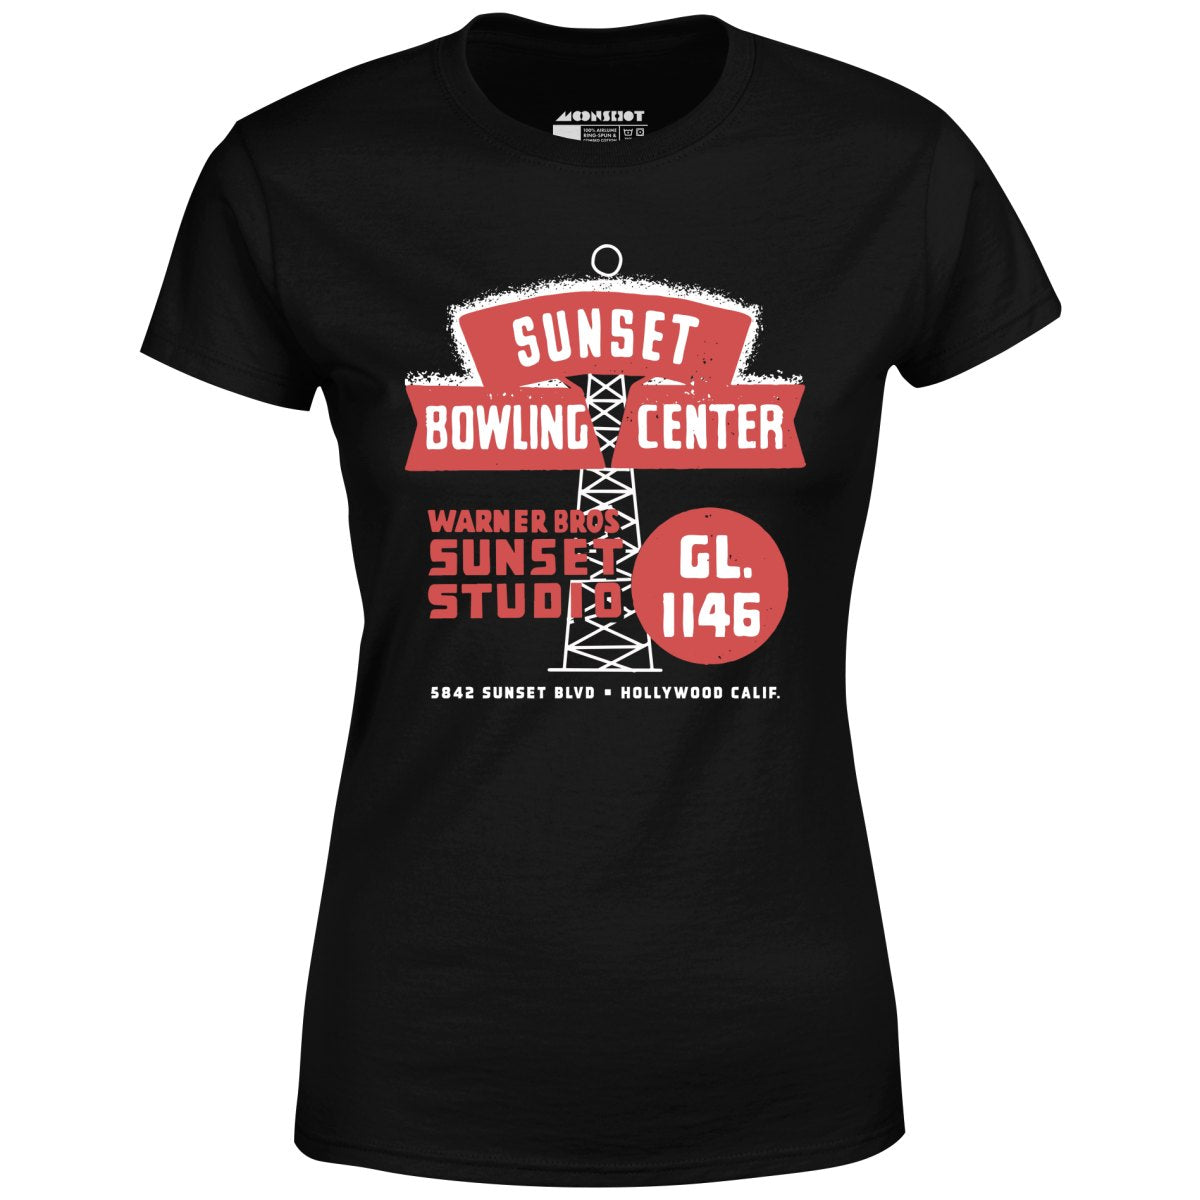 Sunset Bowling Center - Hollywood, CA - Vintage Bowling Alley - Women's T-Shirt